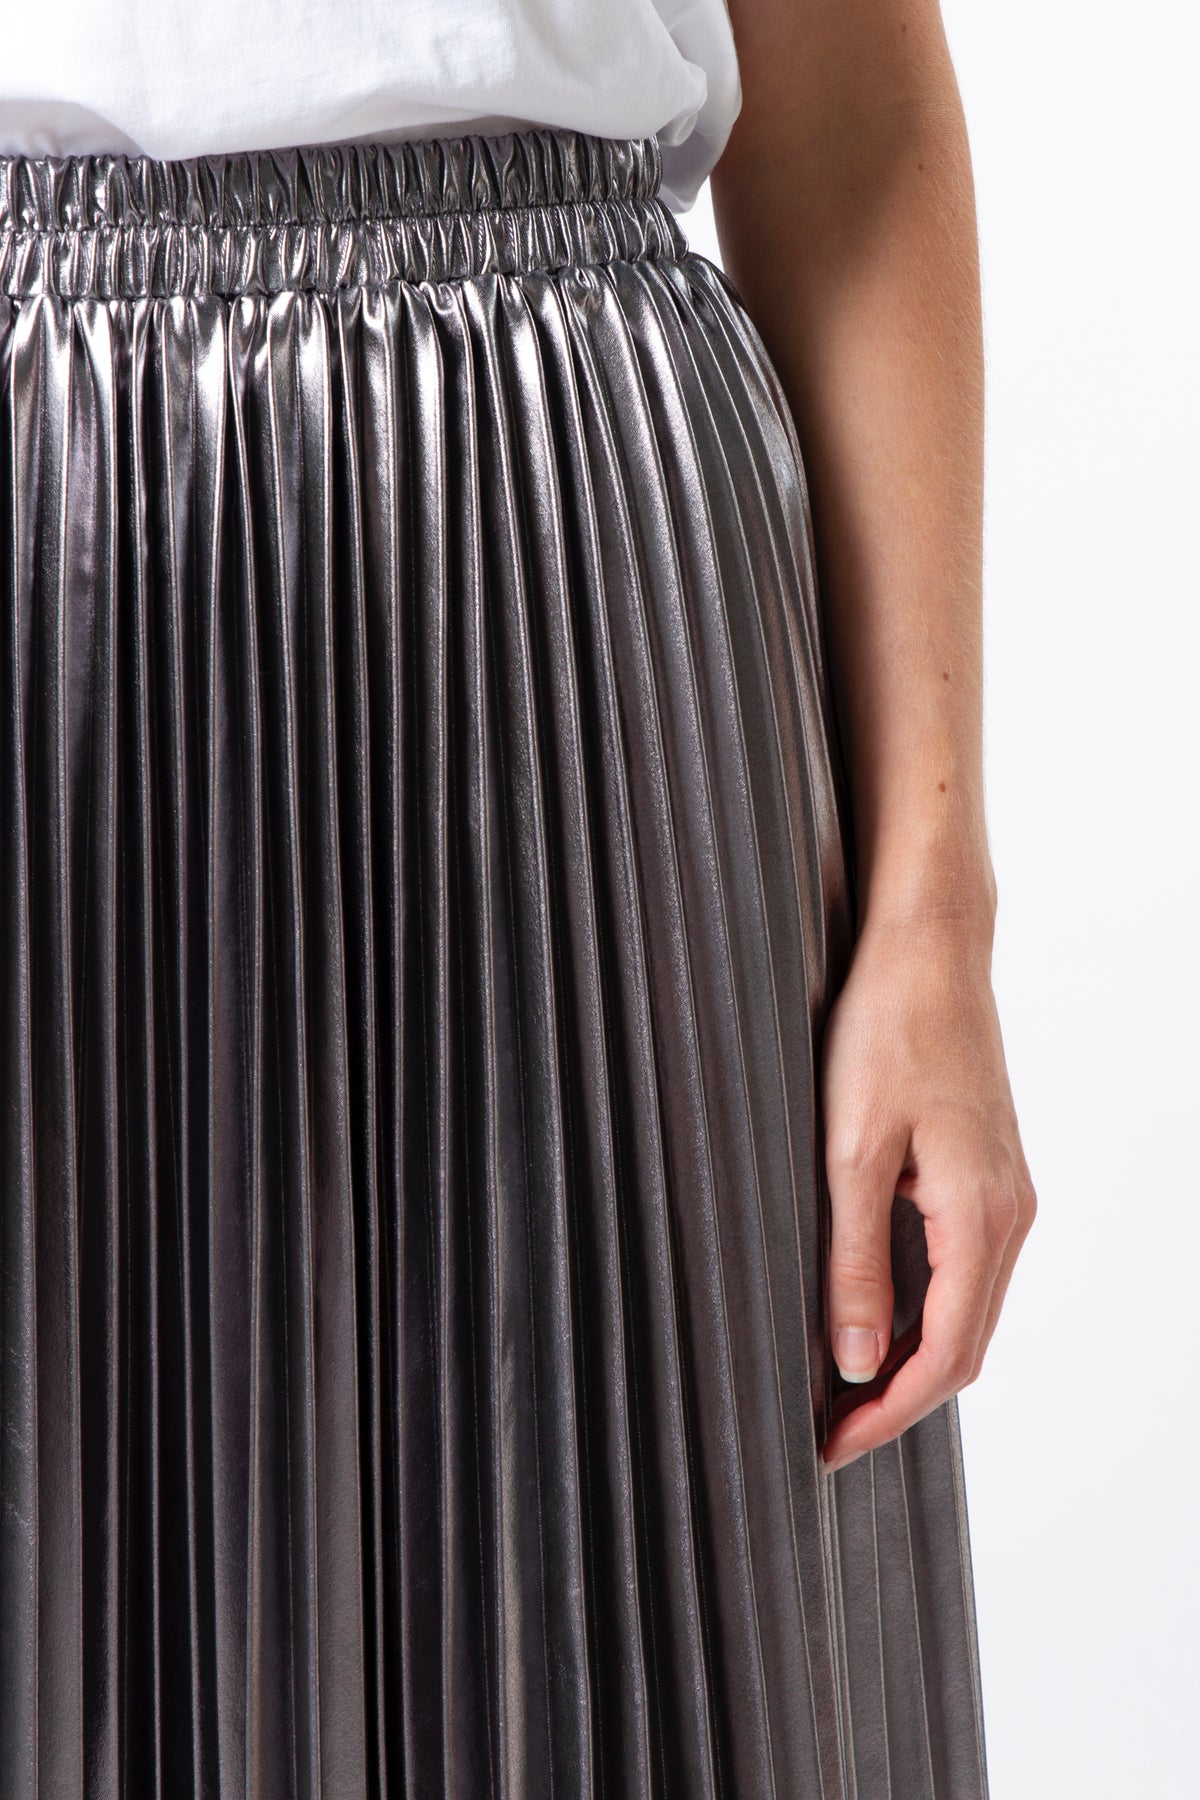 Lula Skirt Gunmetal - PREORDER DELIVERY EARLY JUNE